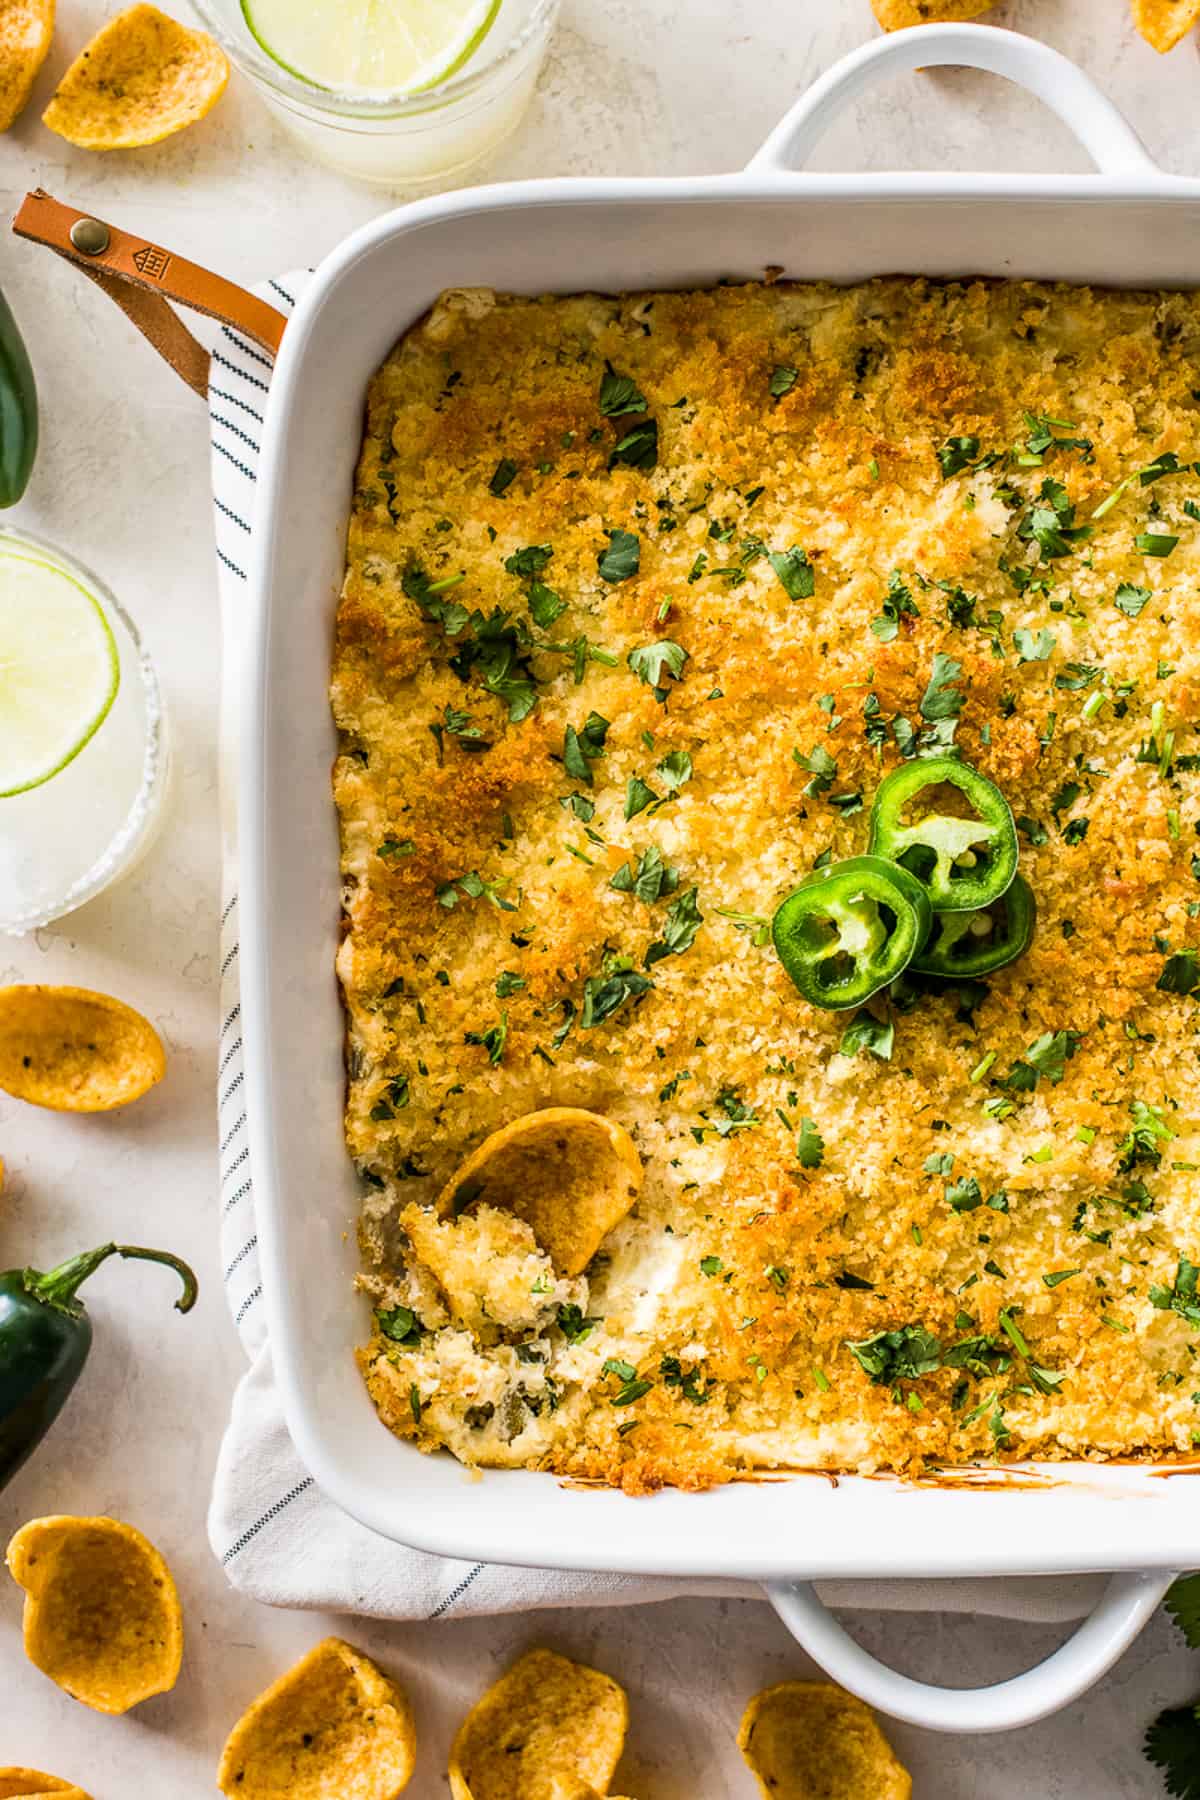 Jalapeno popper dip topped with crispy golden panko breadcrumbs and served with chips.